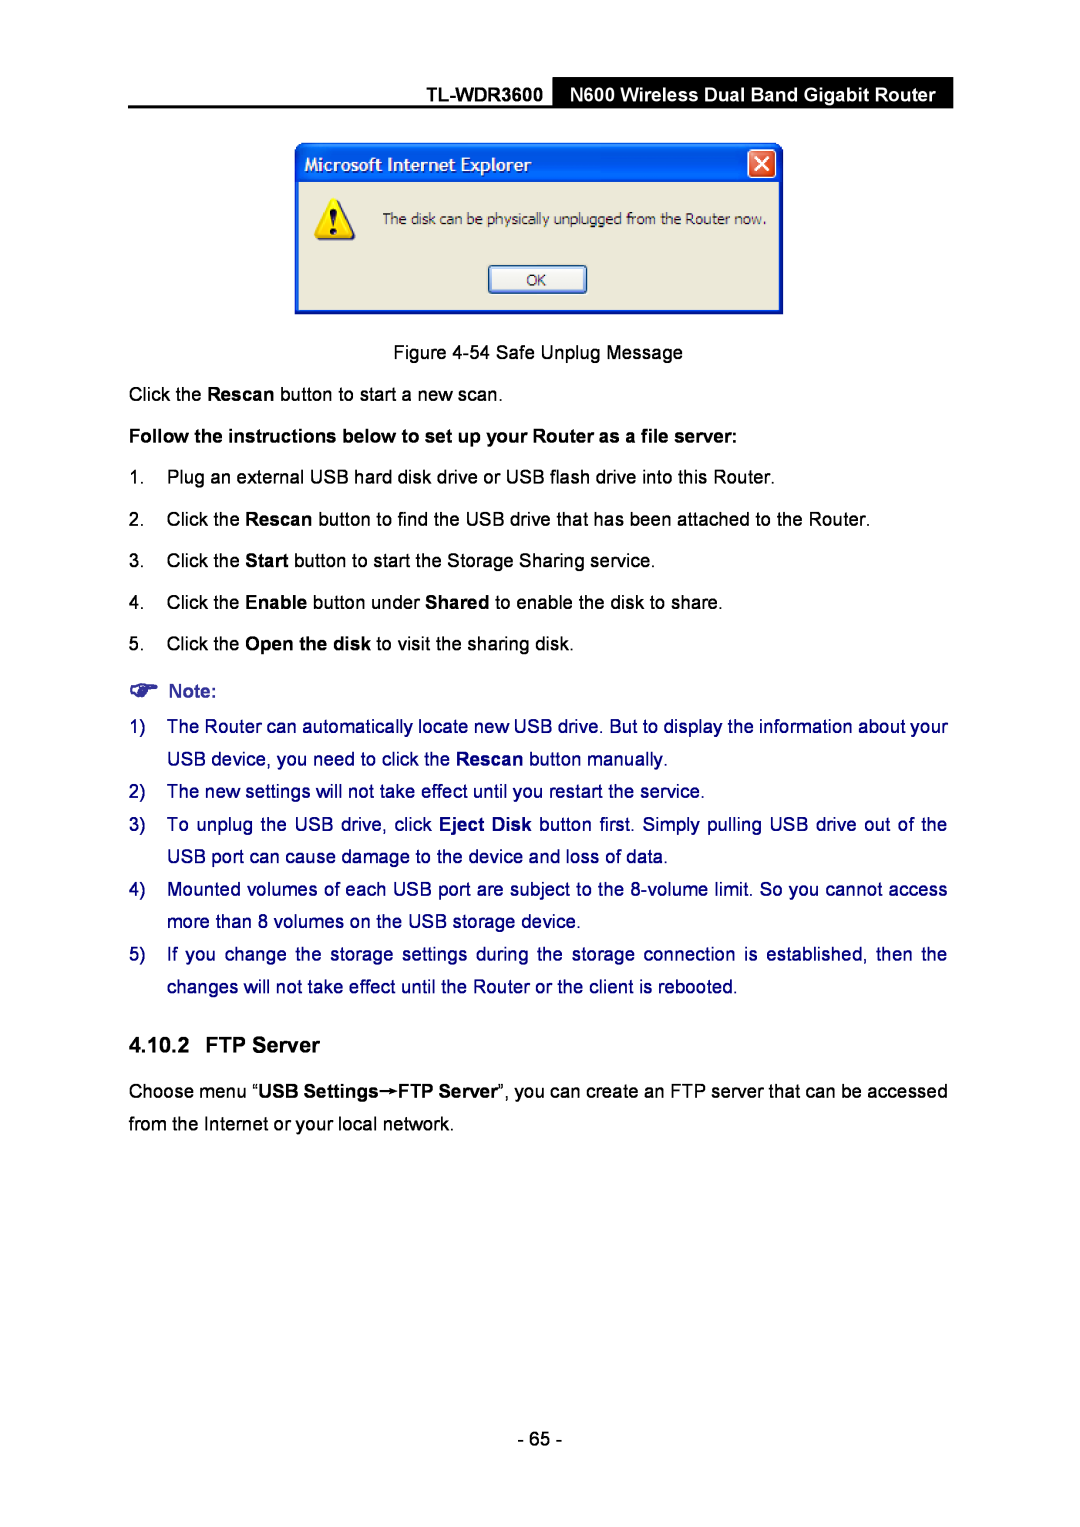 TP-Link TL-WDR3600 manual FTP Server, Follow the instructions below to set up your Router as a file server,  Note 